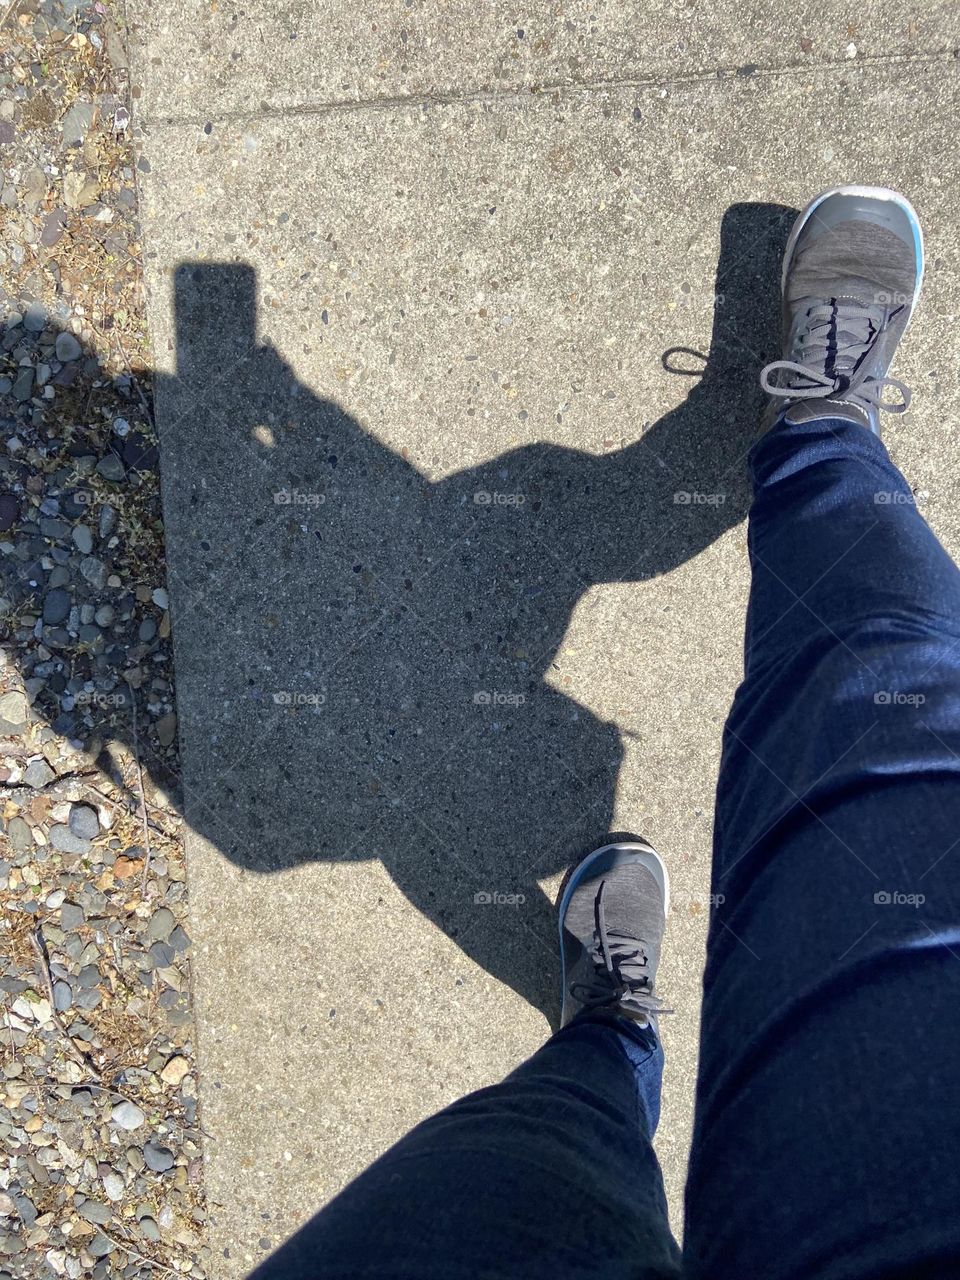 Out for my almost daily walk while on my cell phone, fielding a call from work while sneaking in some exercise. My shadow and my phone’s shadow are on the sidewalk. 